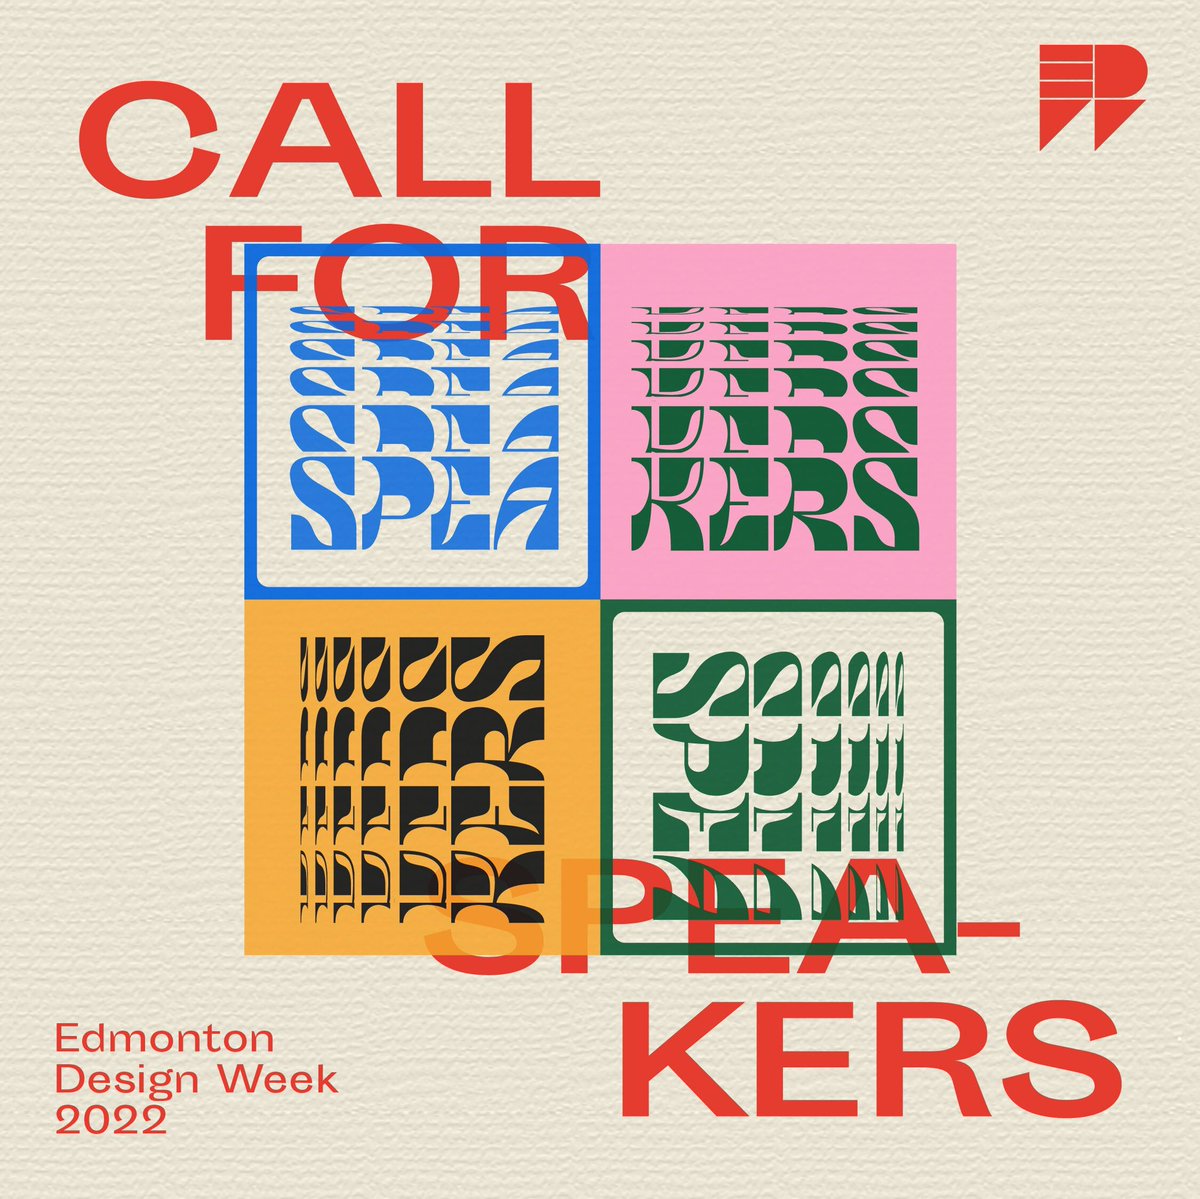 ‼️CALL FOR SPEAKERS. As part of #YEGdesignweek22, we’re looking for speakers to give PechaKucha style presentations about design for an event during the week of October 11-15. Interested? Email a short description of your presentation to info@joinmade.org by Sept 8.